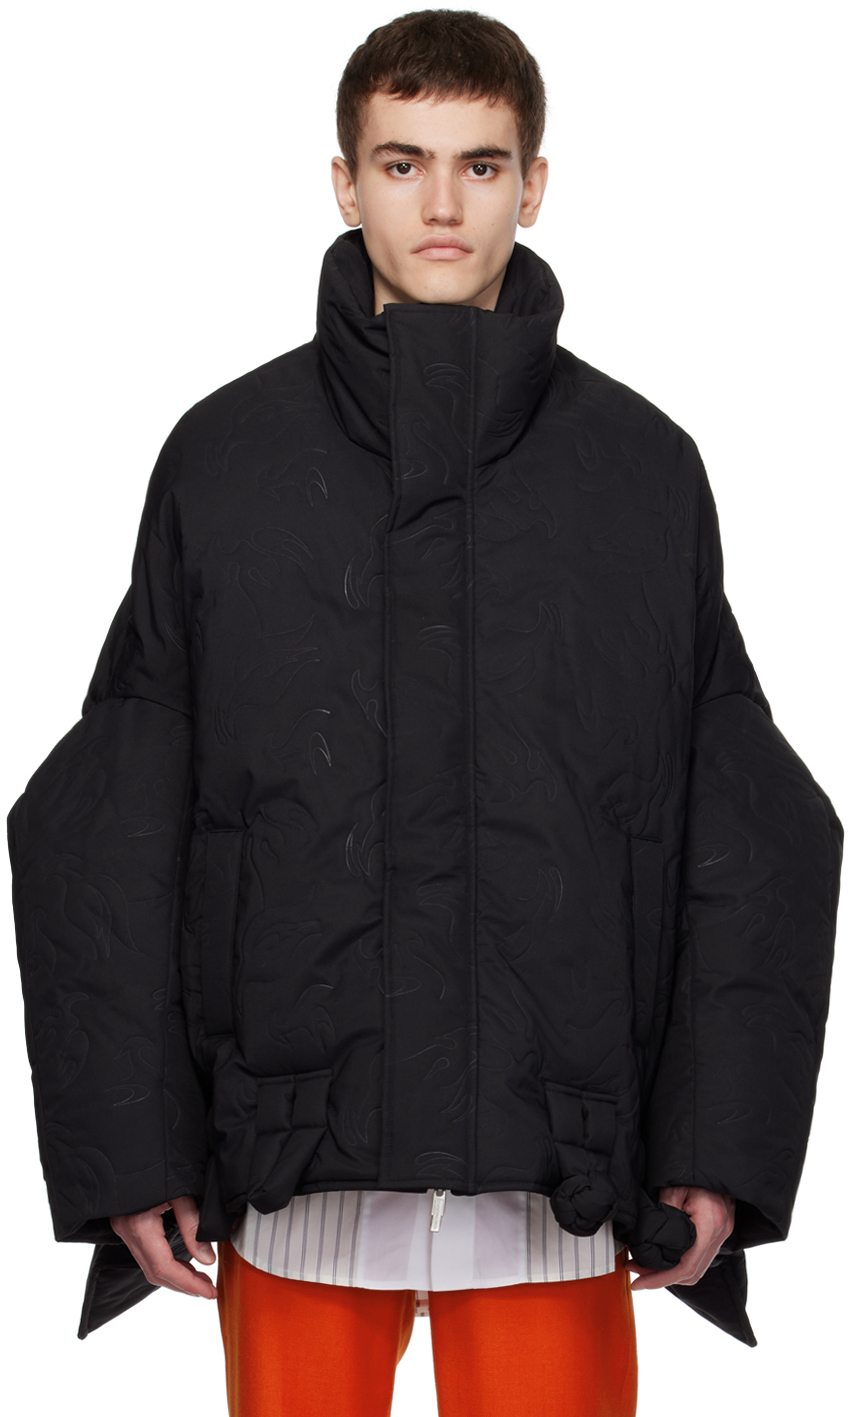 Black Embossed Down Jacket by Feng Chen Wang on Sale